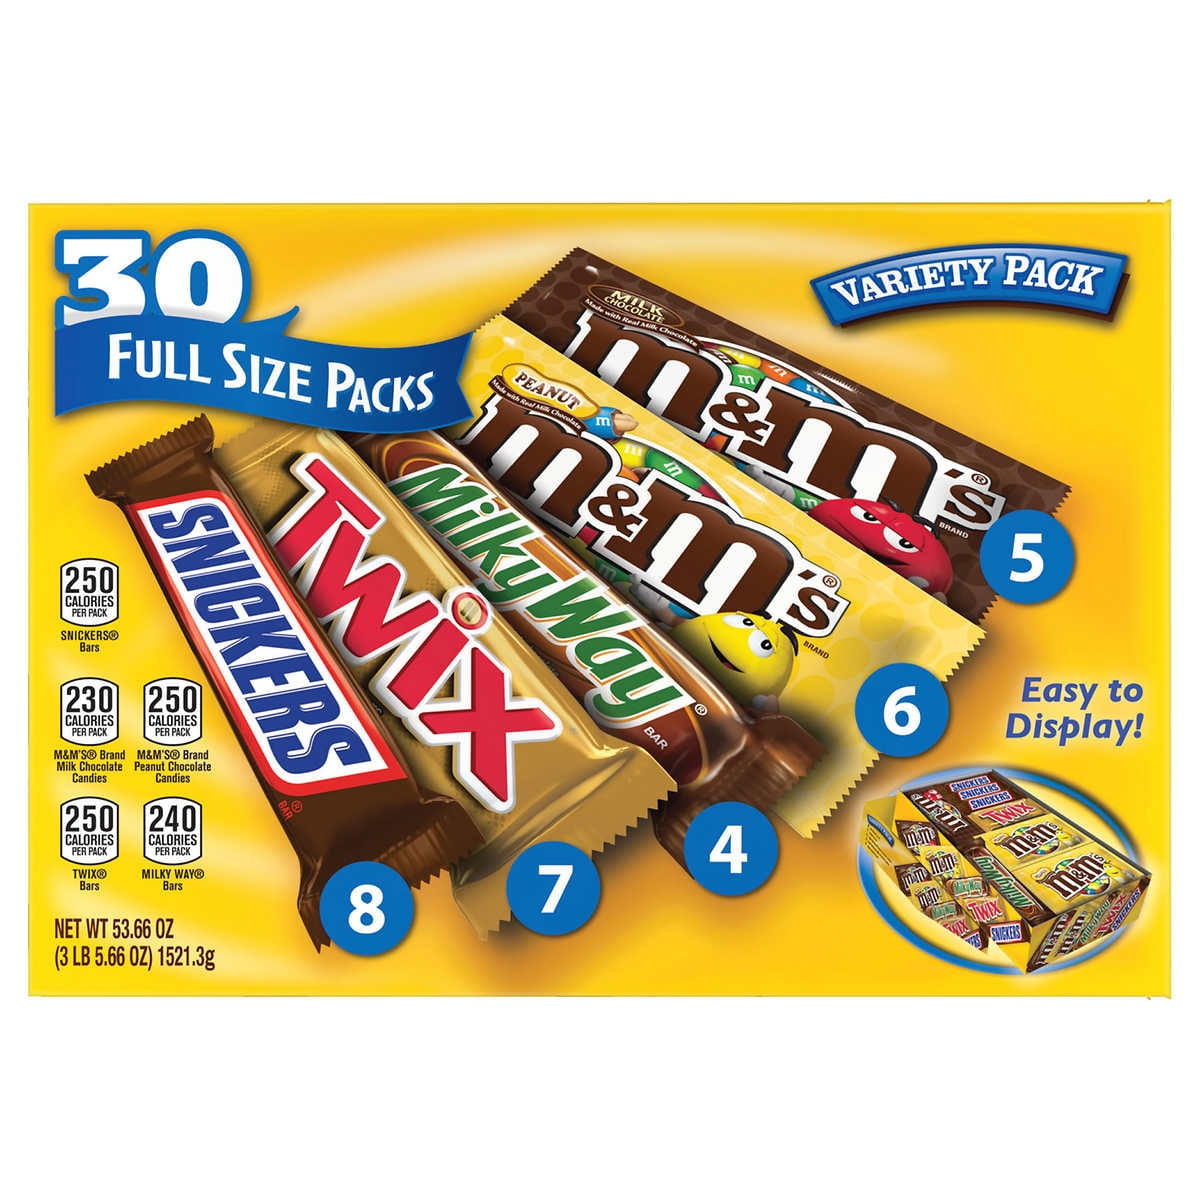 Mars SN50025 M&M'S Crispy Chocolate Candy Party Size 30-Ounce Bag